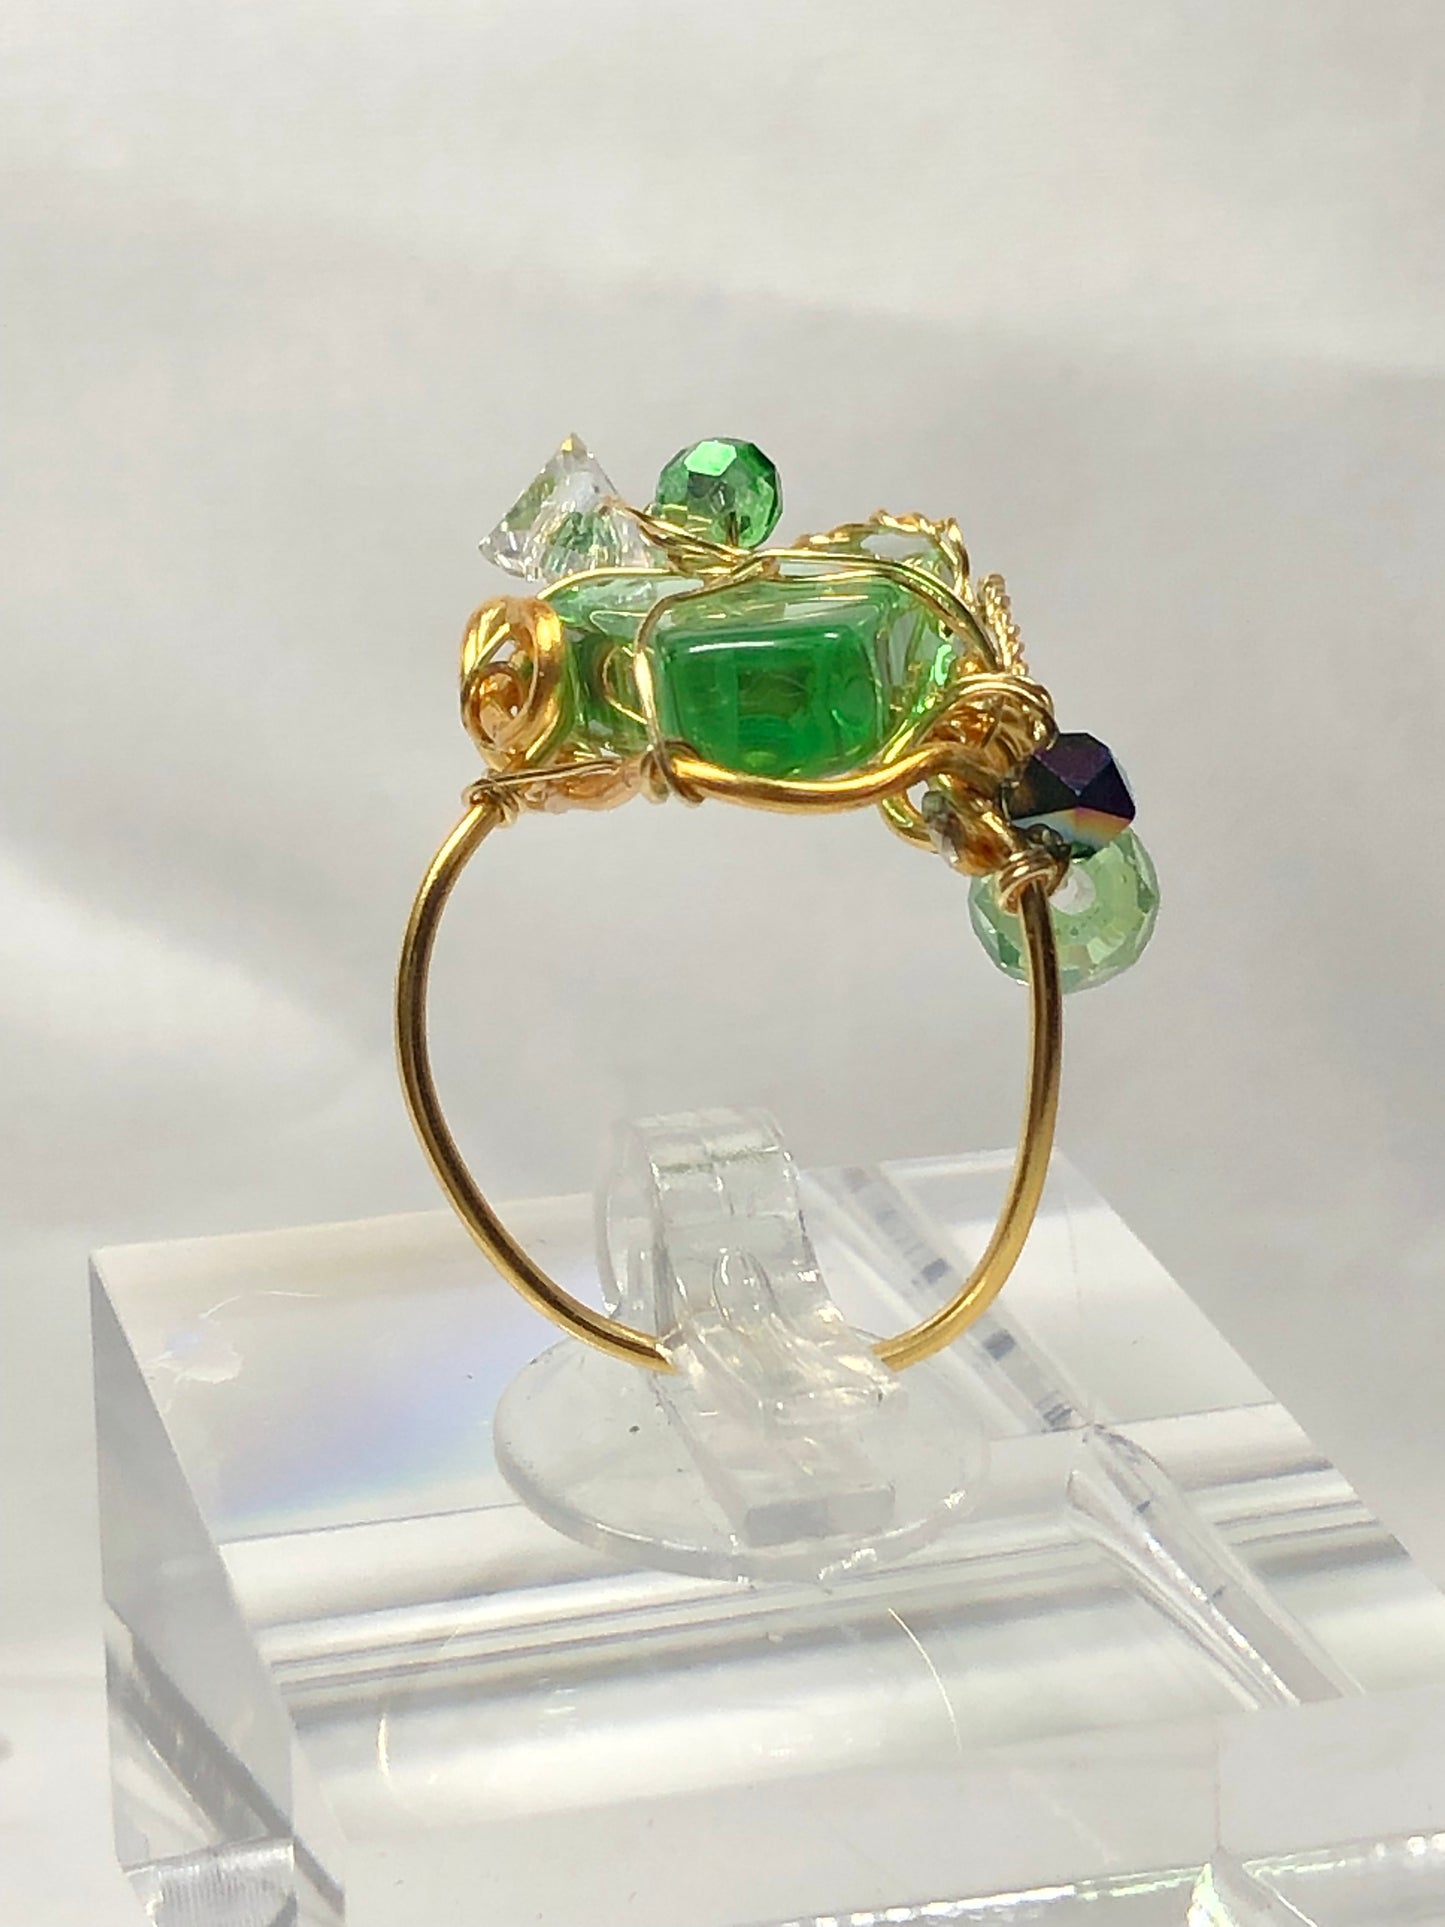 The emerald city ring